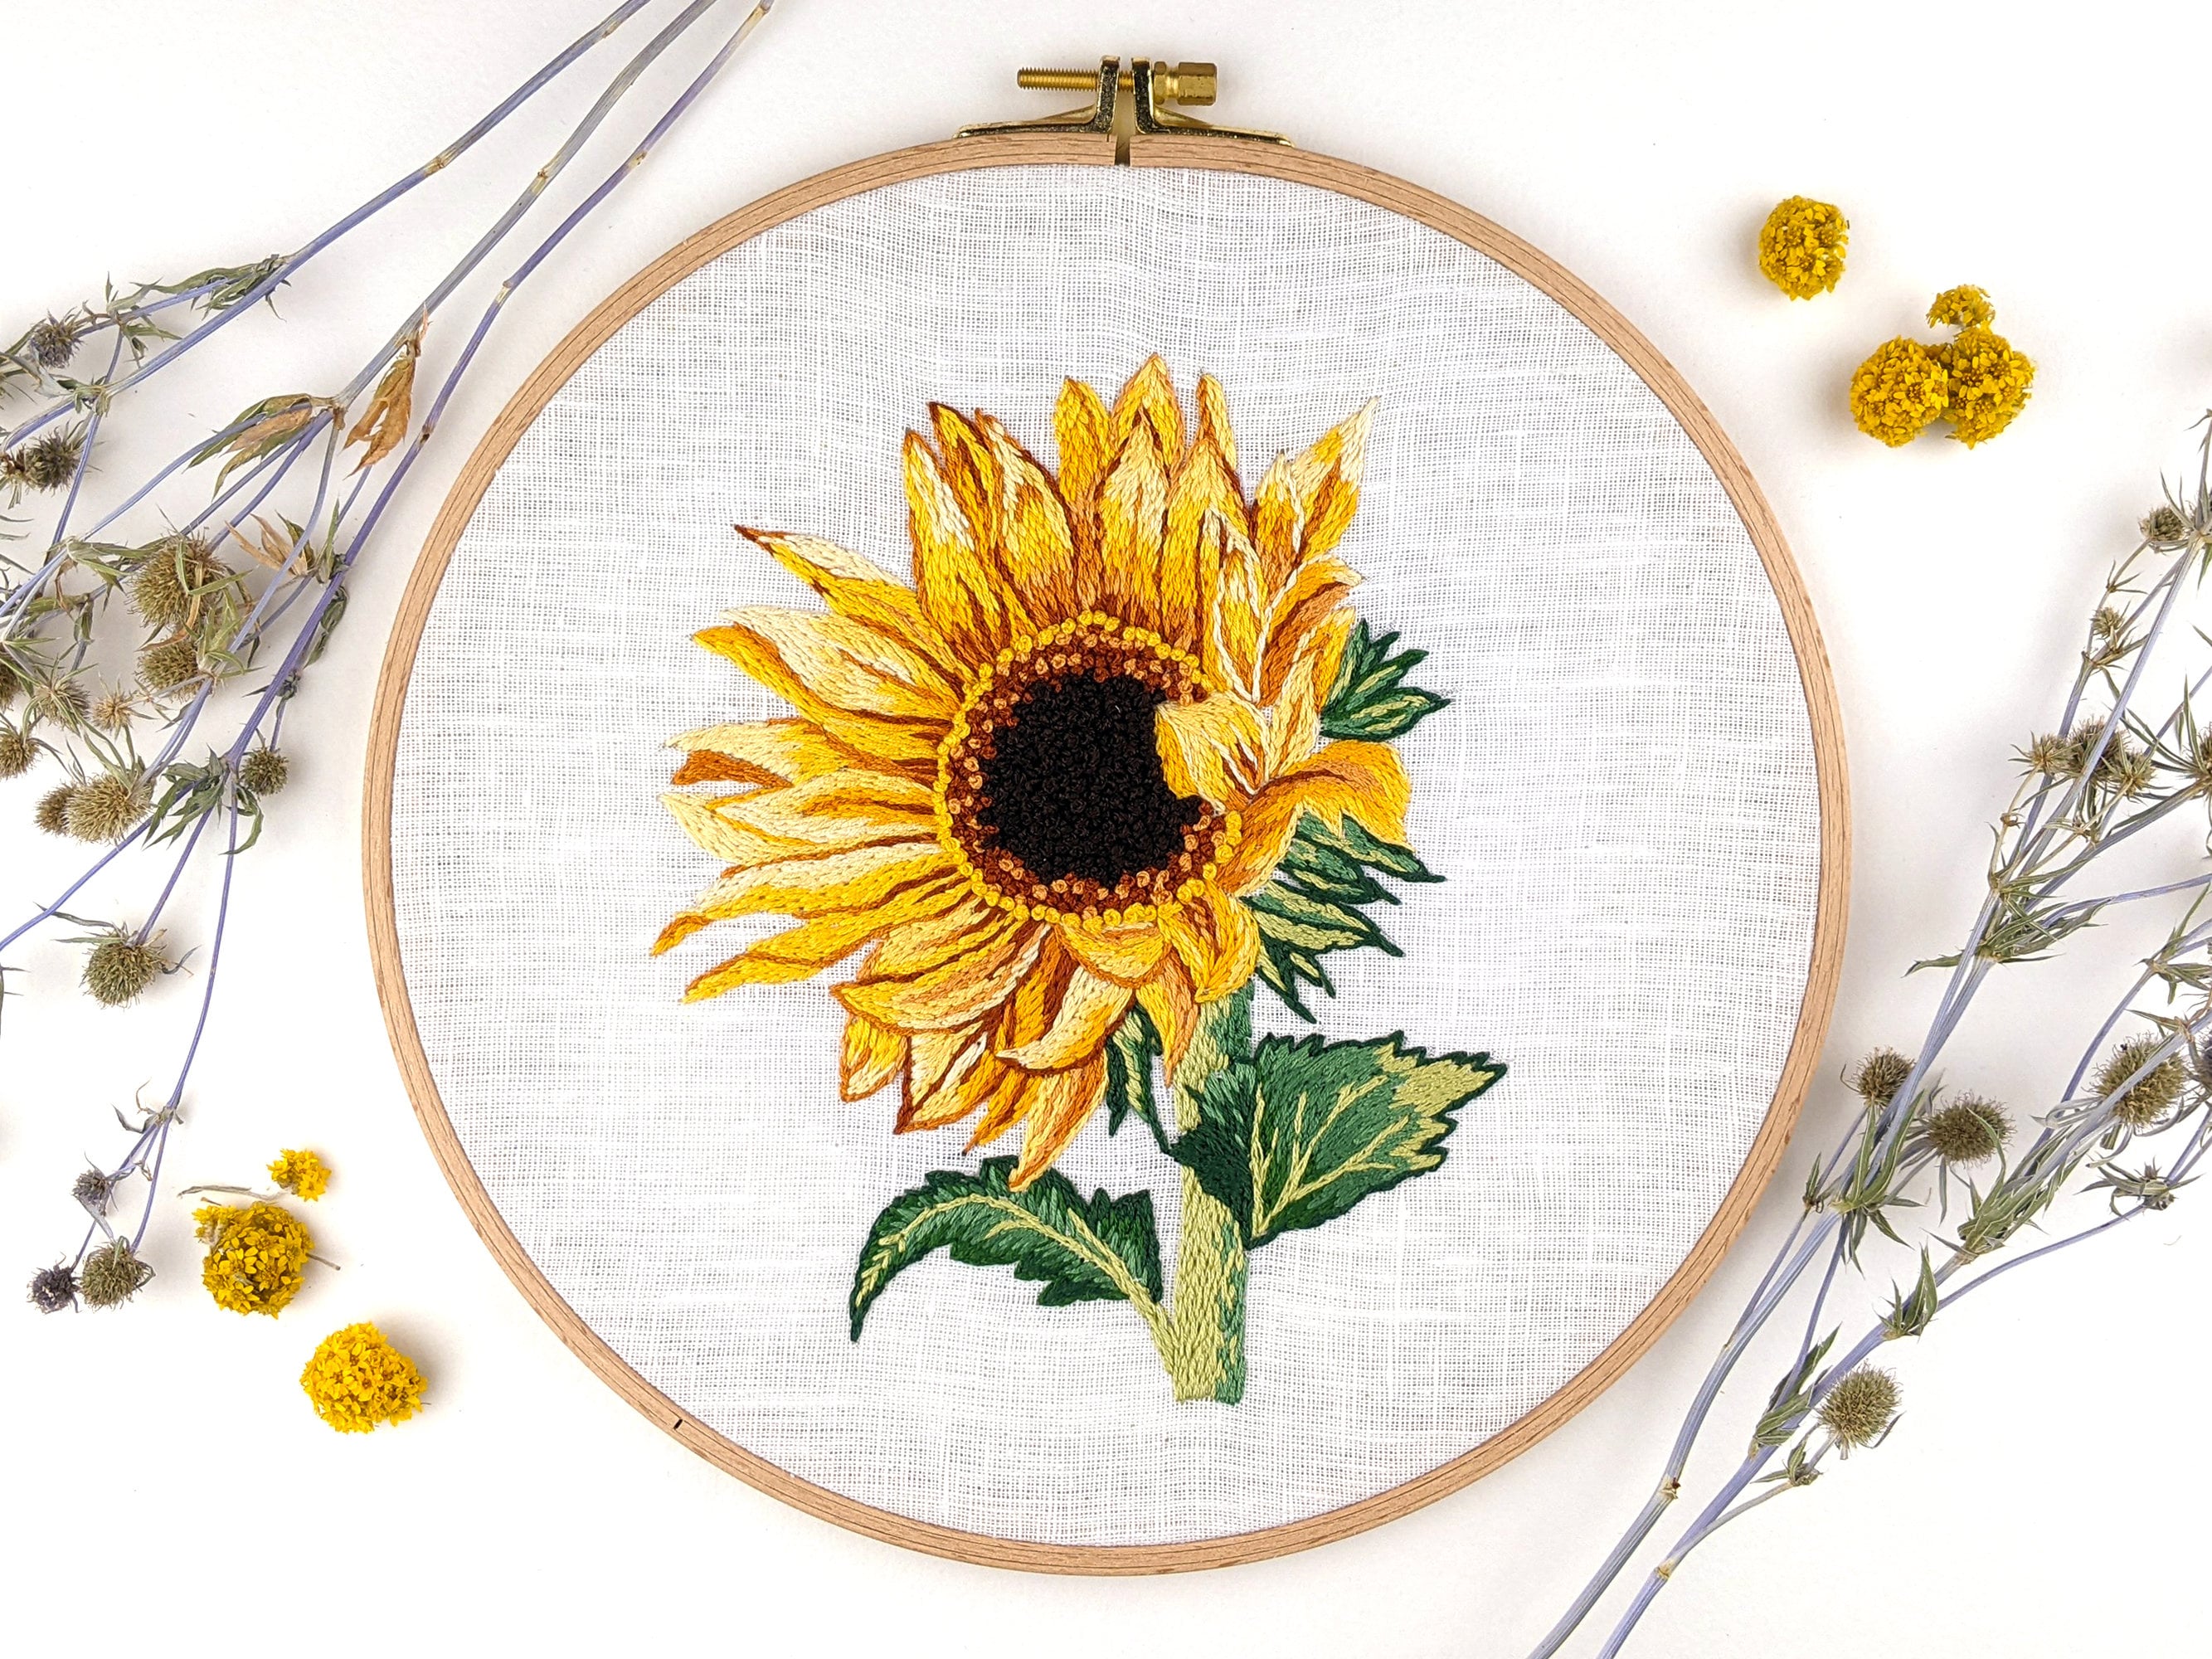 Sunflower Embroidery Pattern Video Tutorial pic